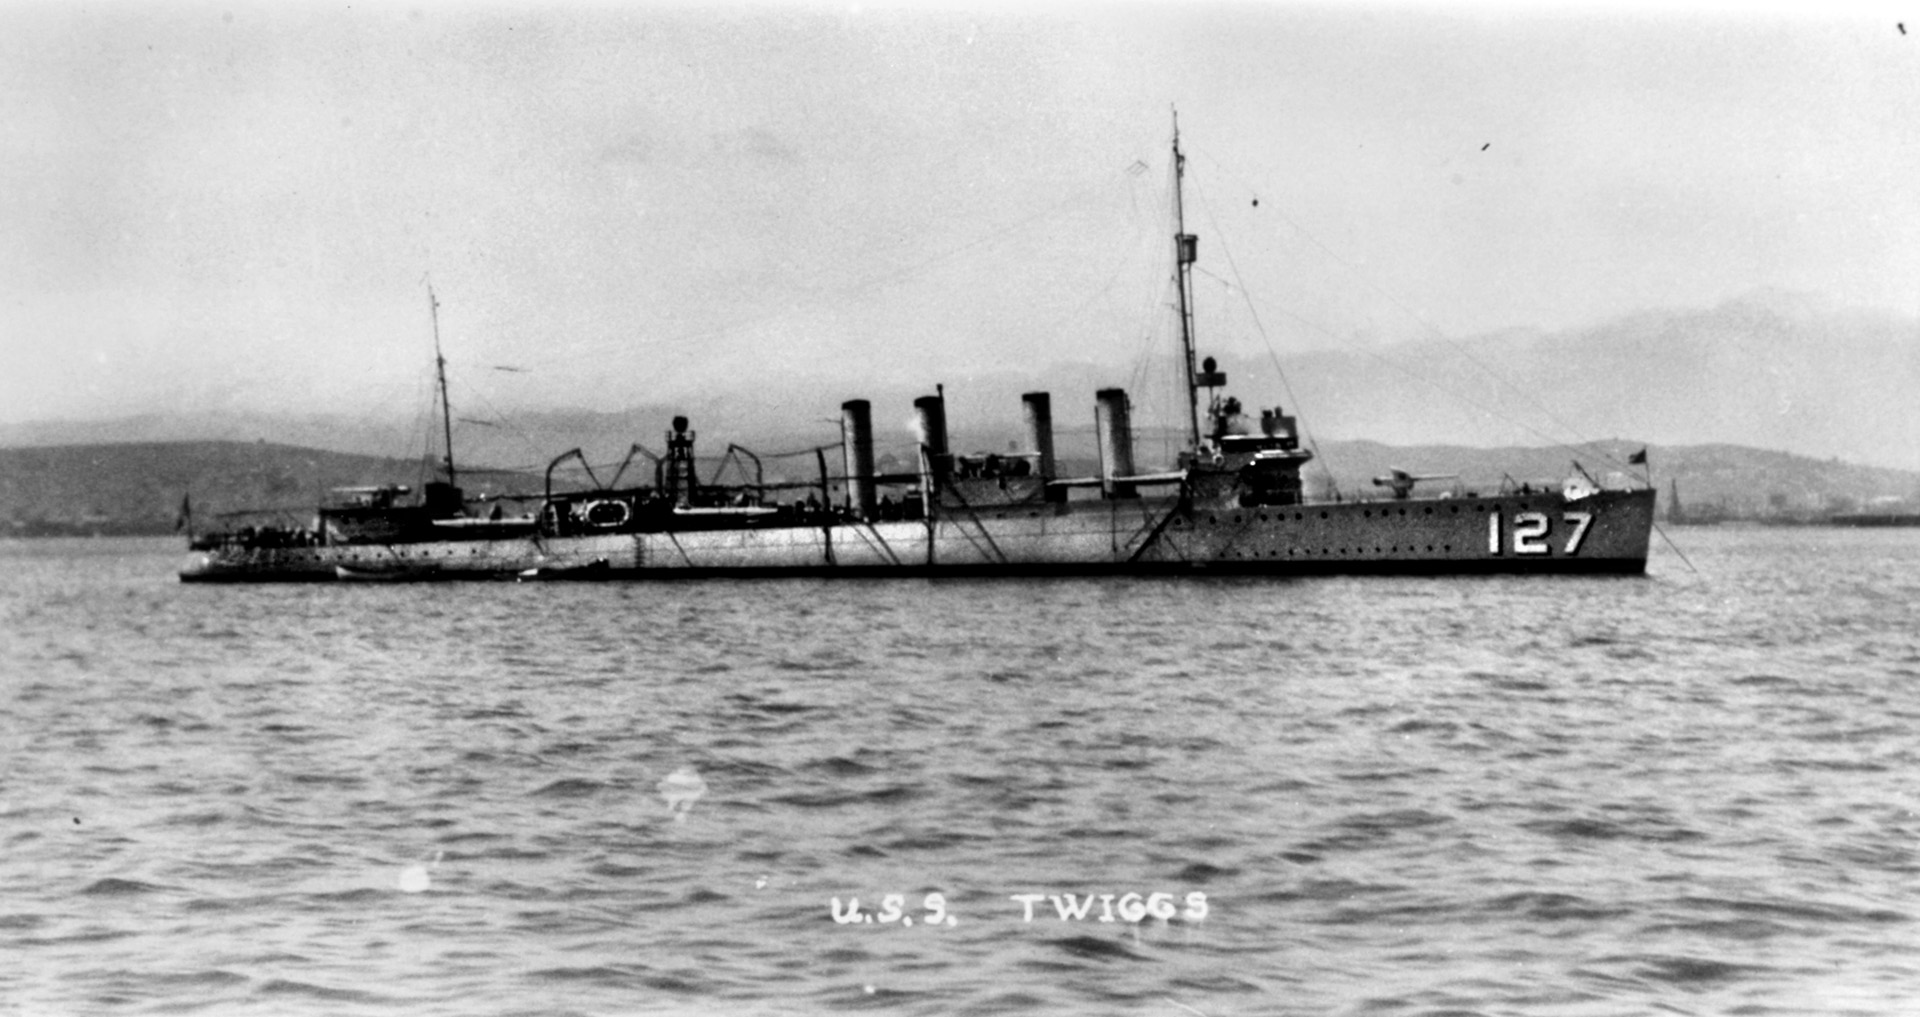 Originally the destroyer USS Twiggs, HMS Leamington was later leased to the Soviet Navy and served until 1951. Leamington was the last of the Lend-Lease destroyers to be retired from active duty and one of few warships to serve under three flags. 